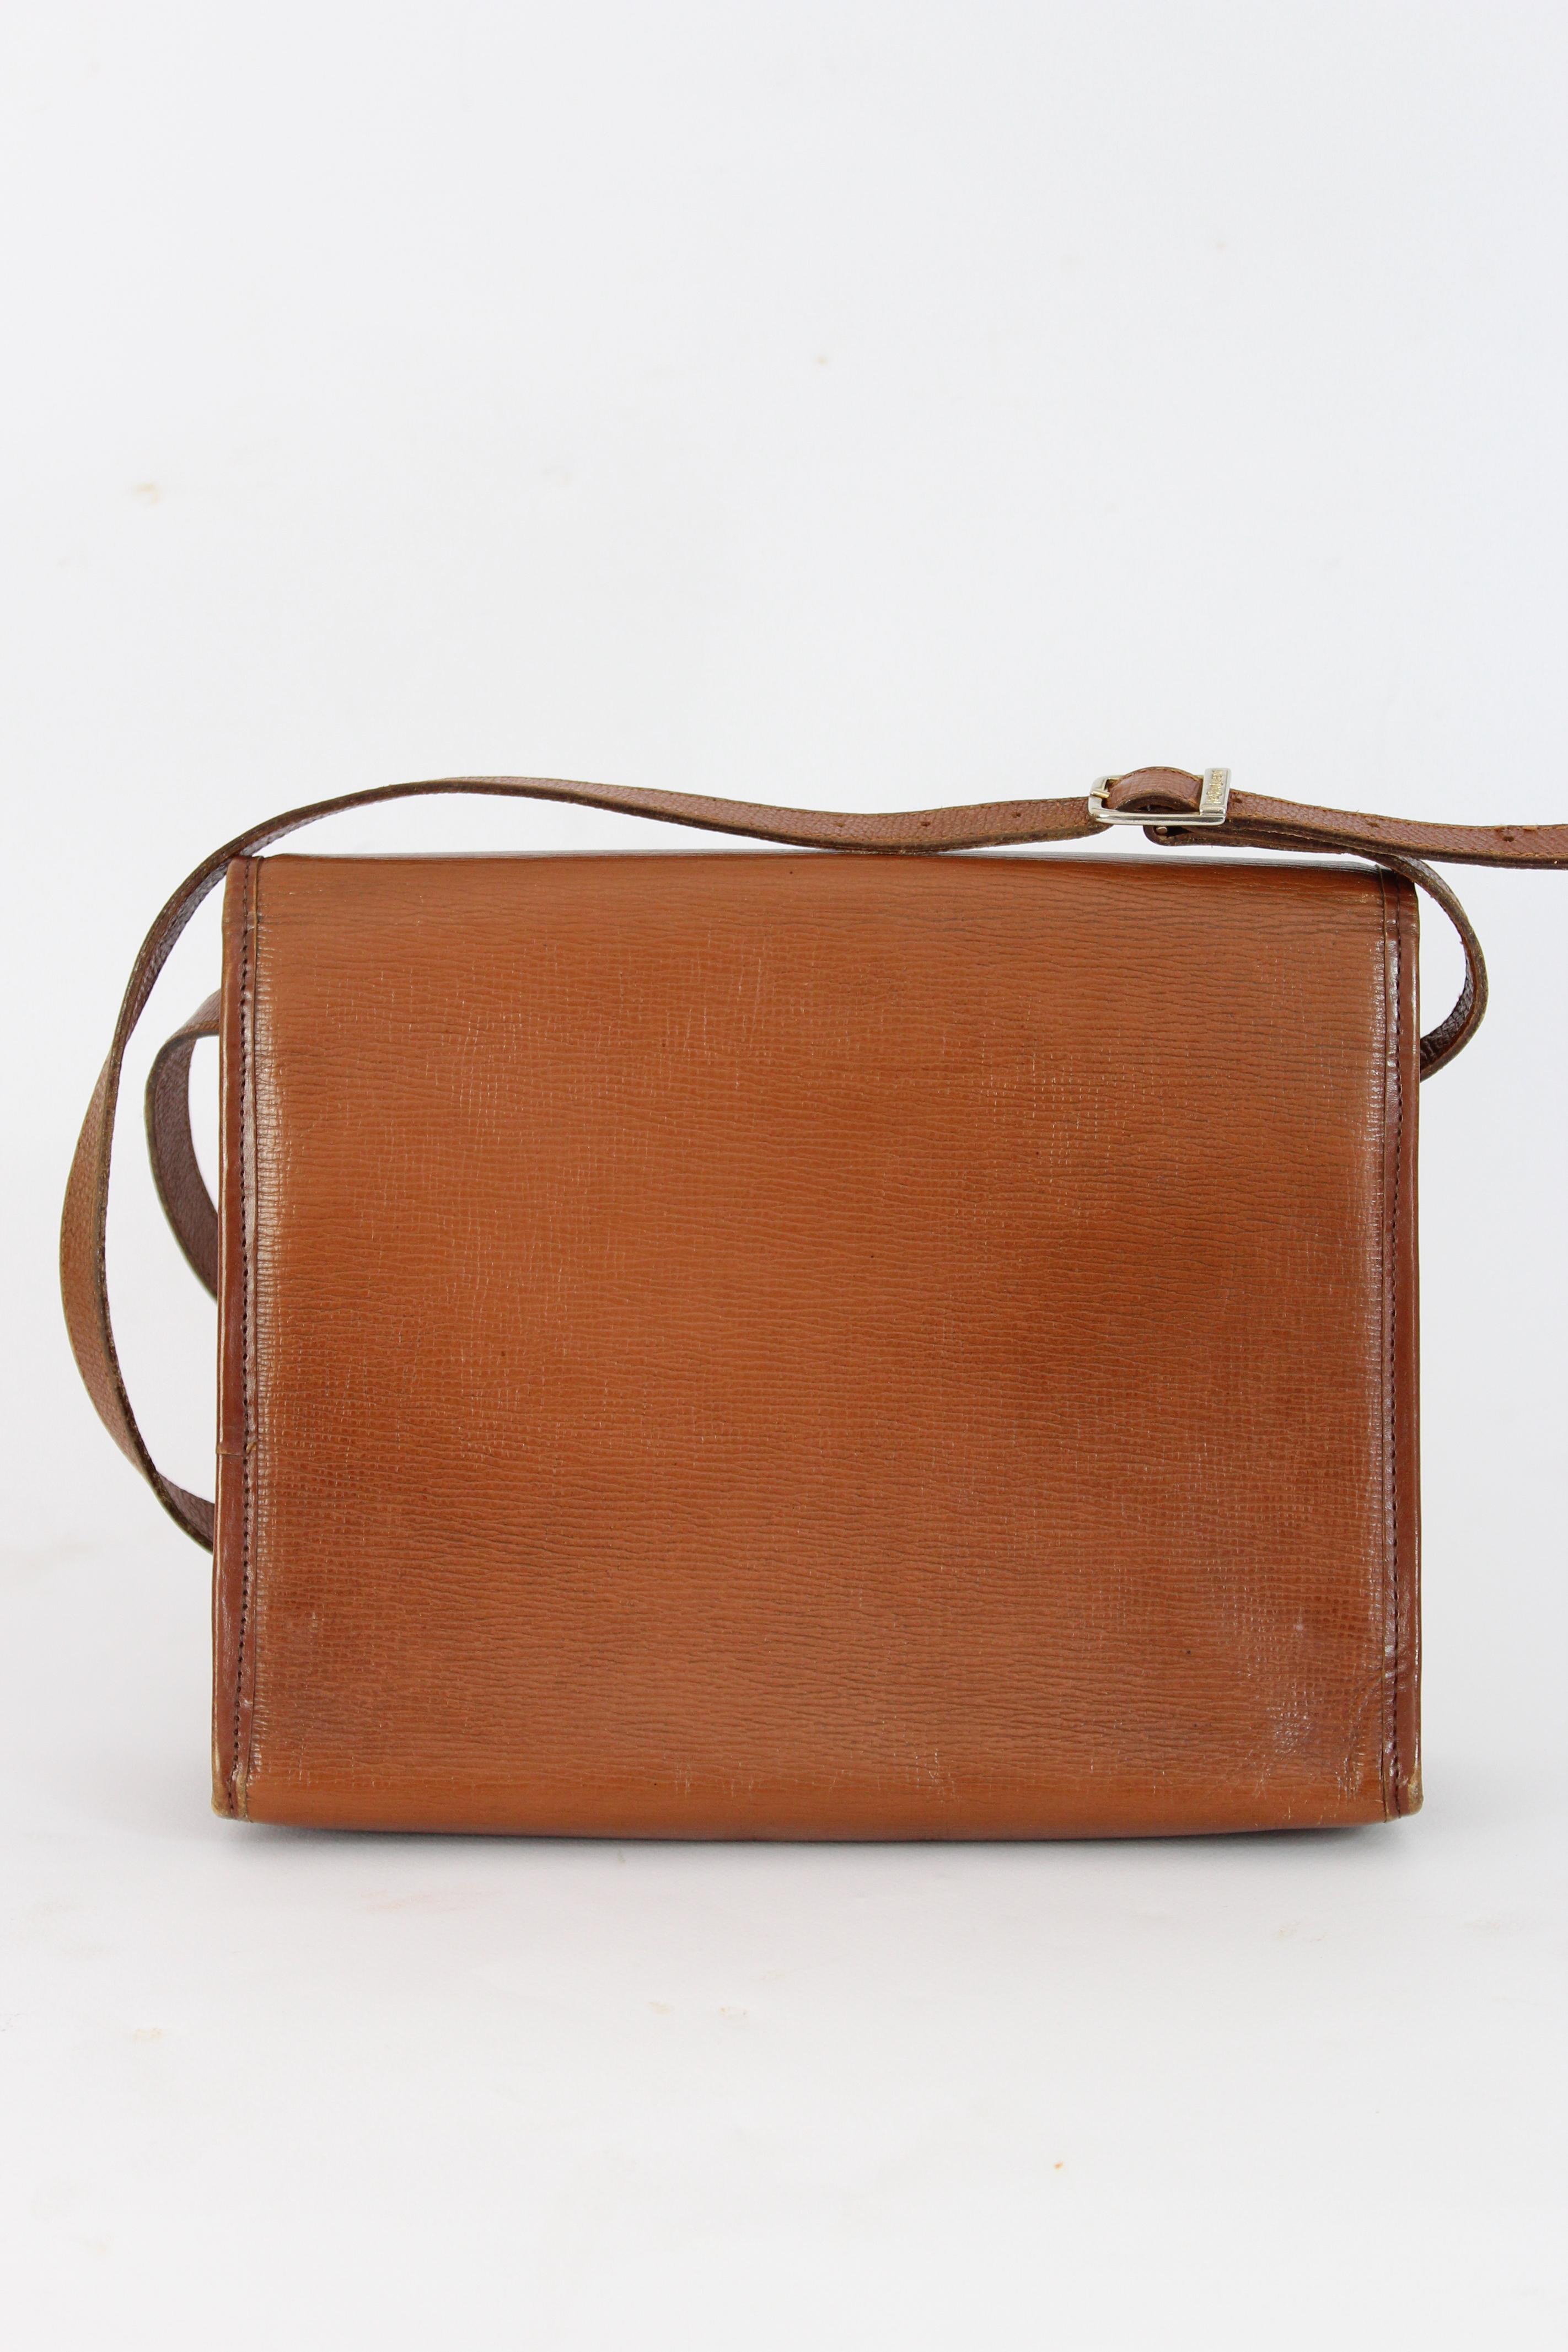 Yves Saint Laurent Brown Leather Shoulder Bag 1980s  In Good Condition In Brindisi, Bt